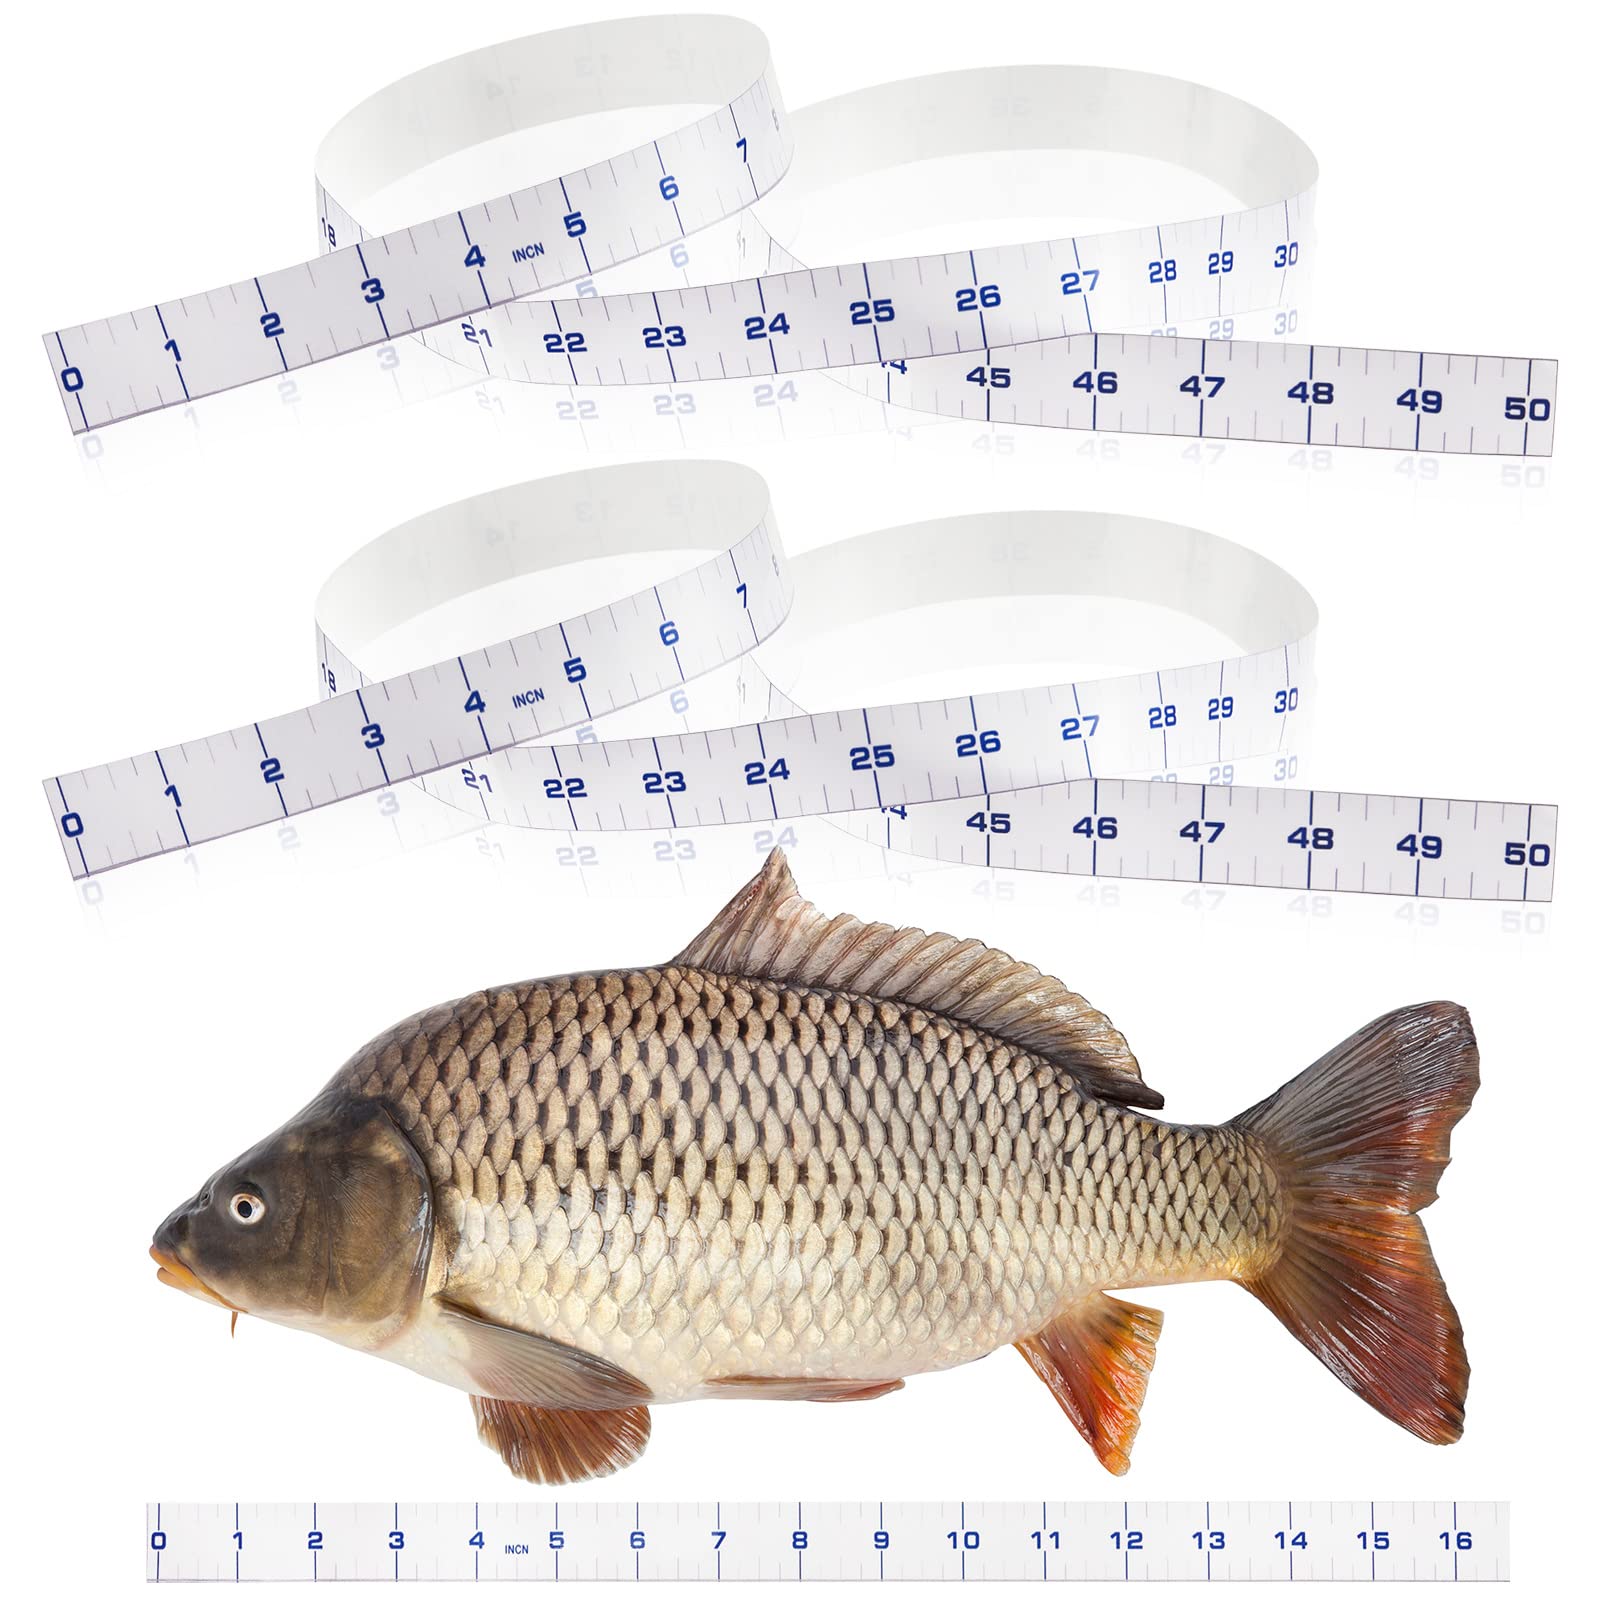 36 Rod Ruler Fish Measuring Decals (2 Pack) - Transparent Stickers Enable  2 Second Fish Measuring on Any Fishing Rod Anytime Anywhere - Made in USA 